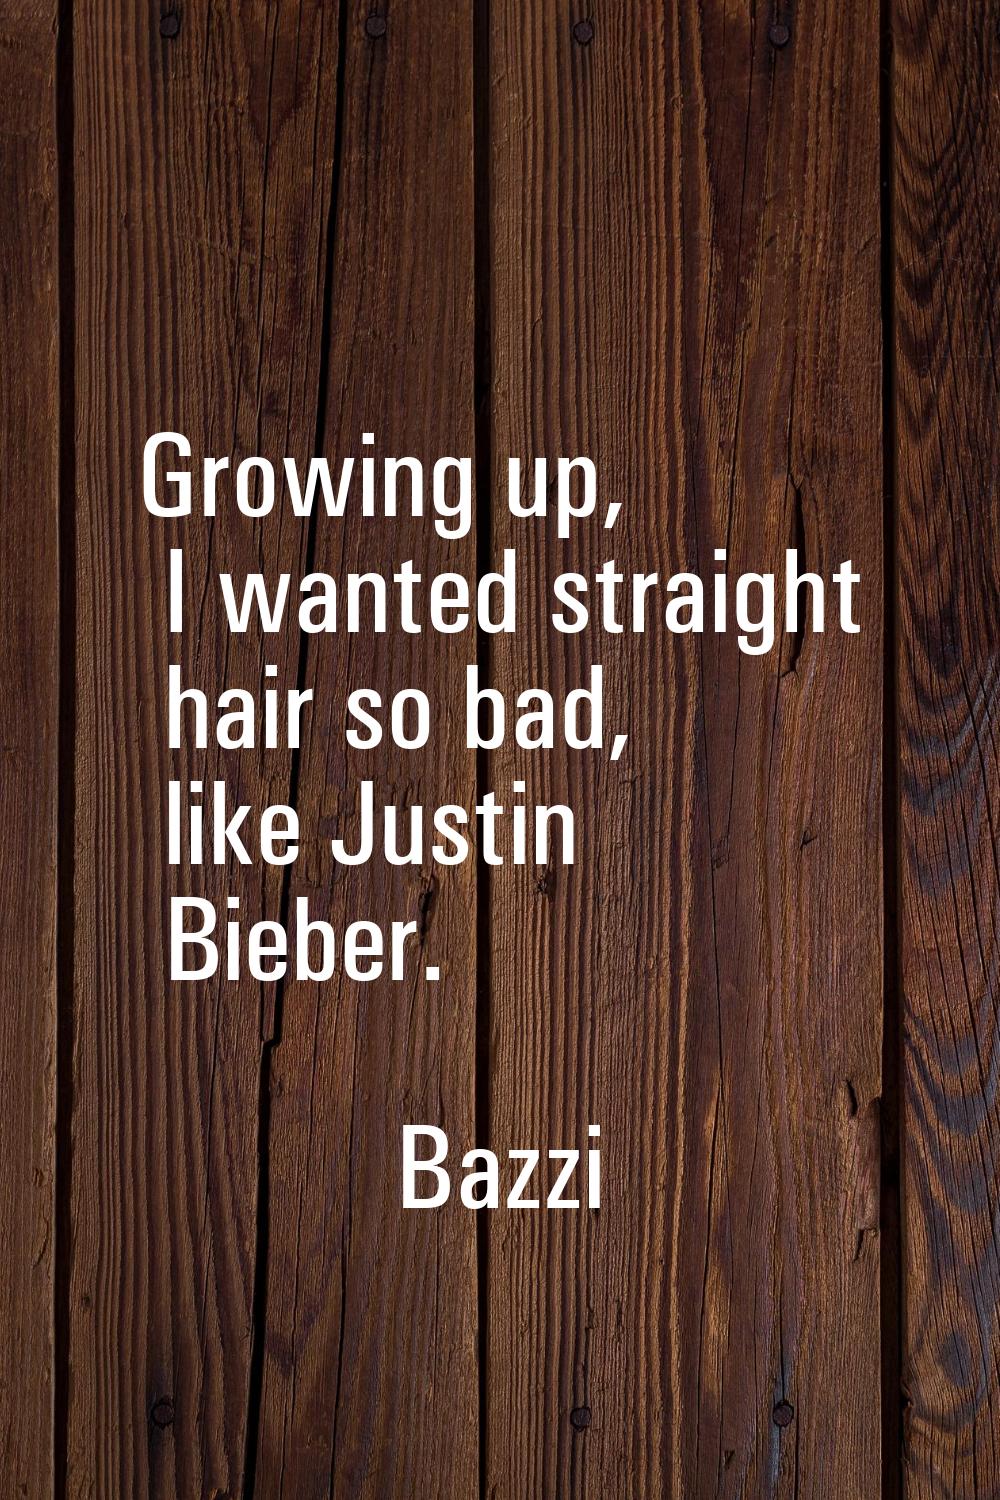 Growing up, I wanted straight hair so bad, like Justin Bieber.